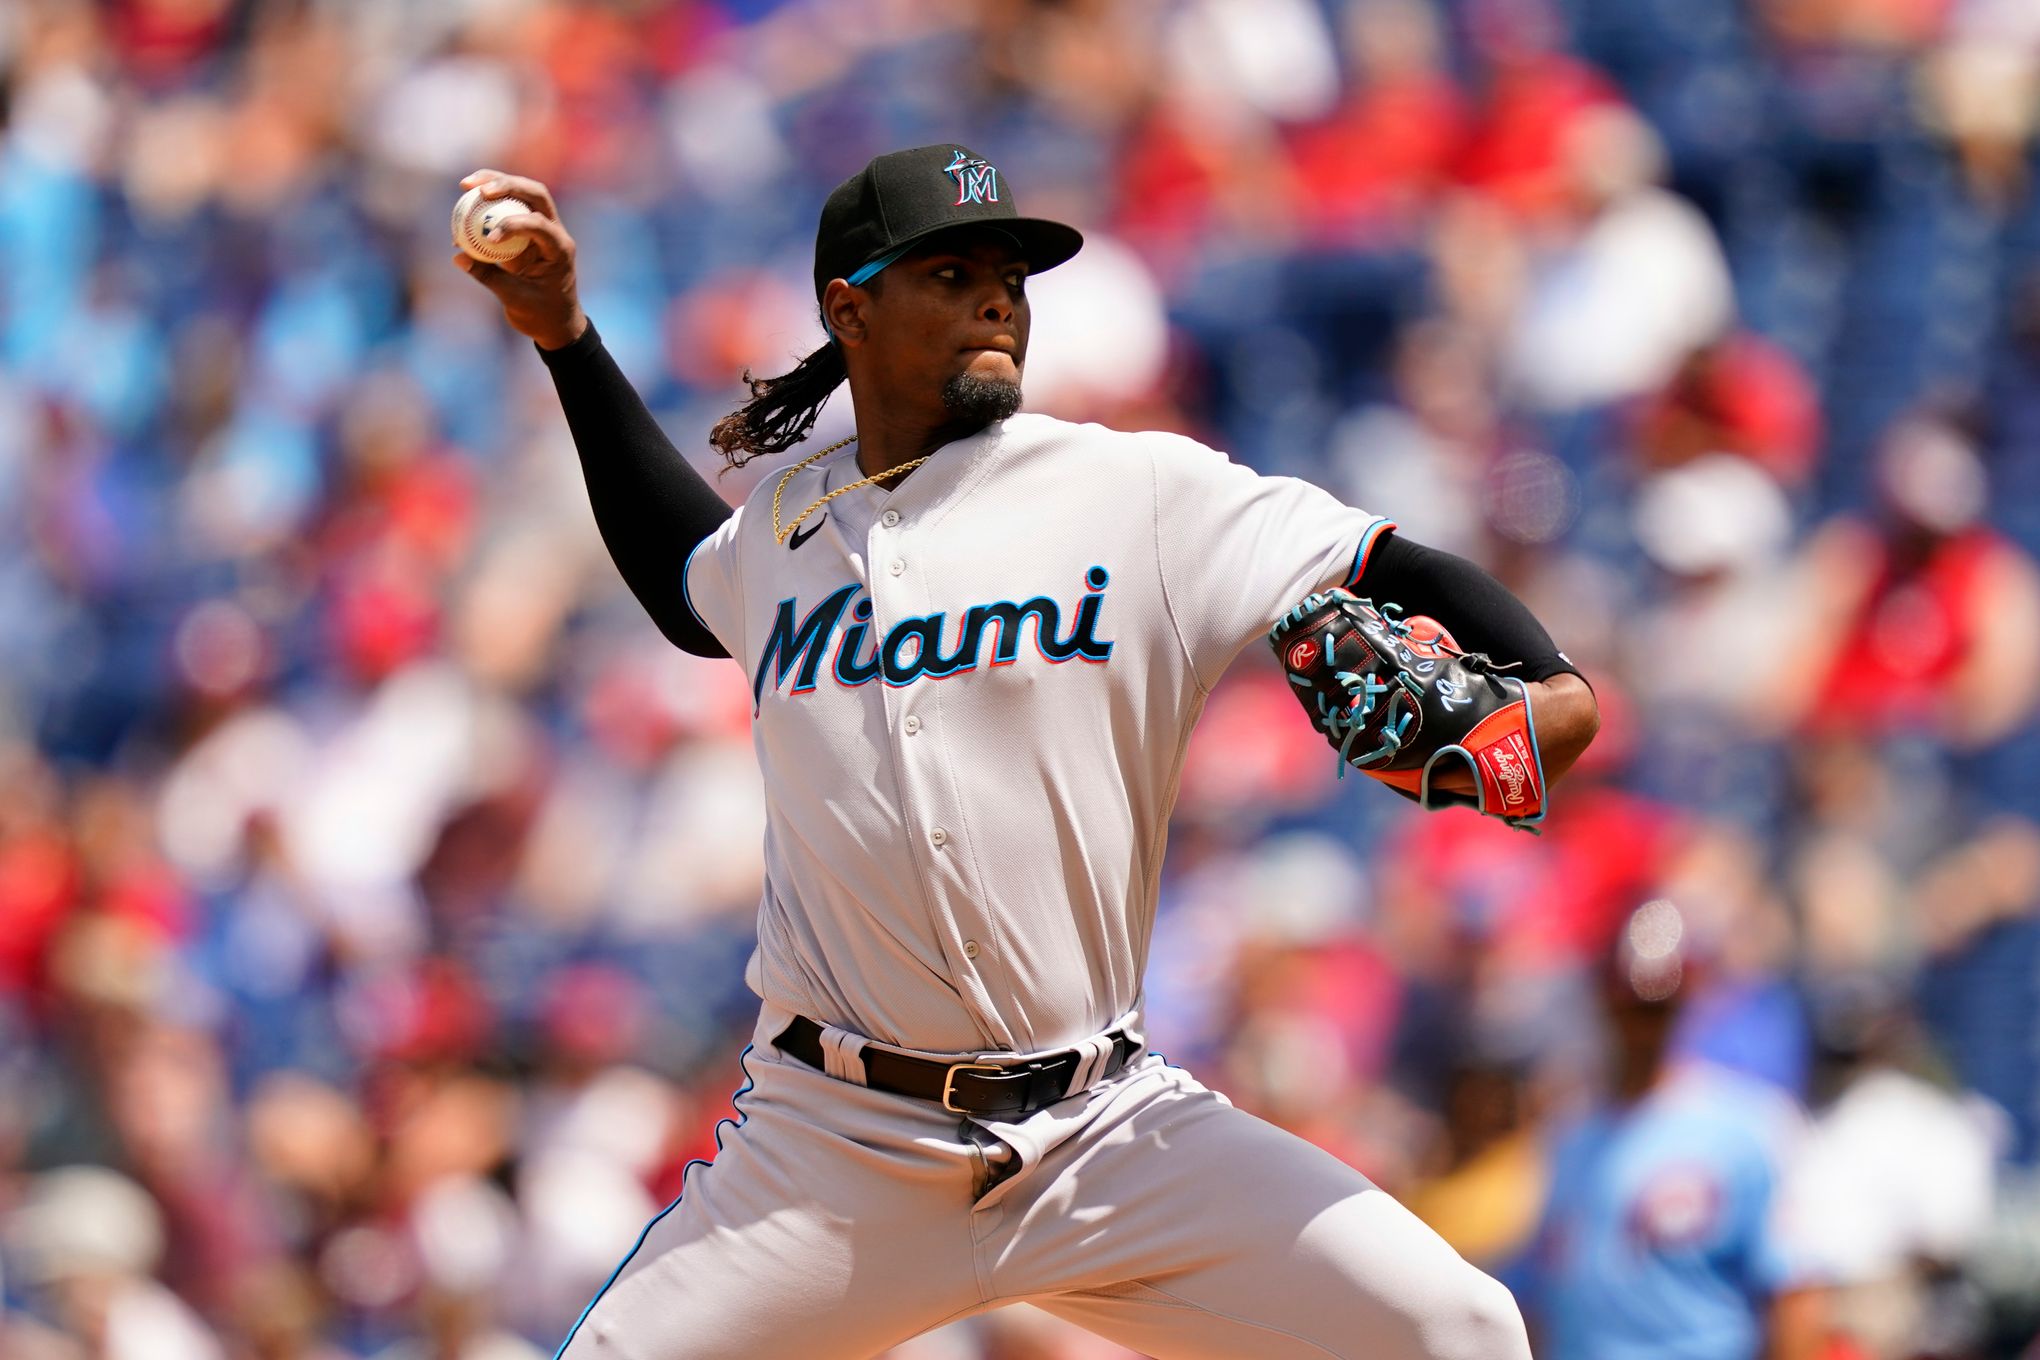 Marlins end season with 4-3 win over Phillies